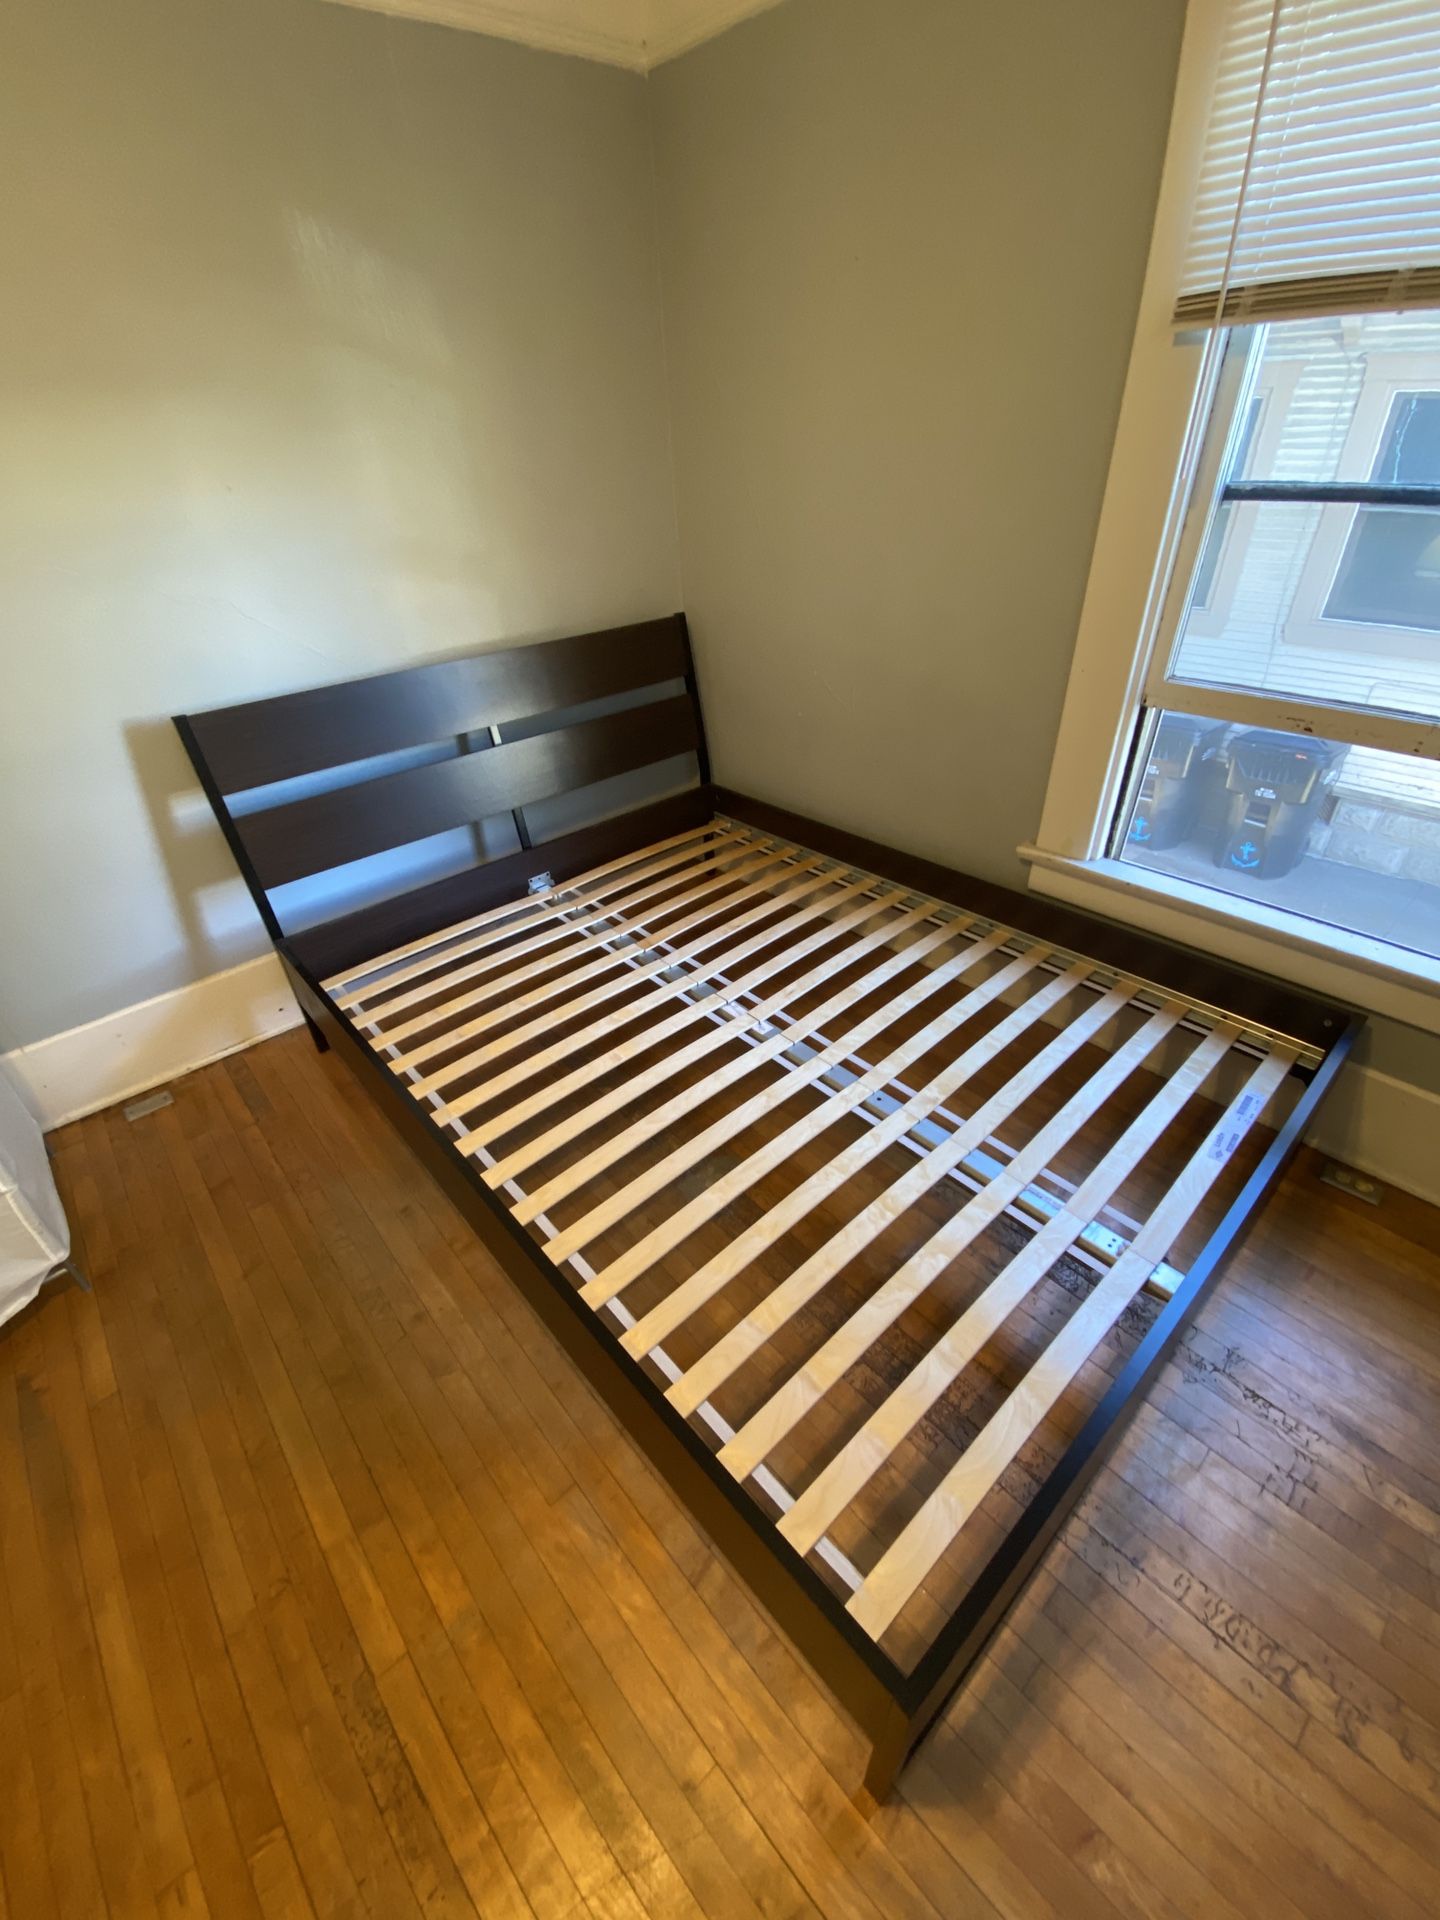 Queen Size Bed Frame IKEA